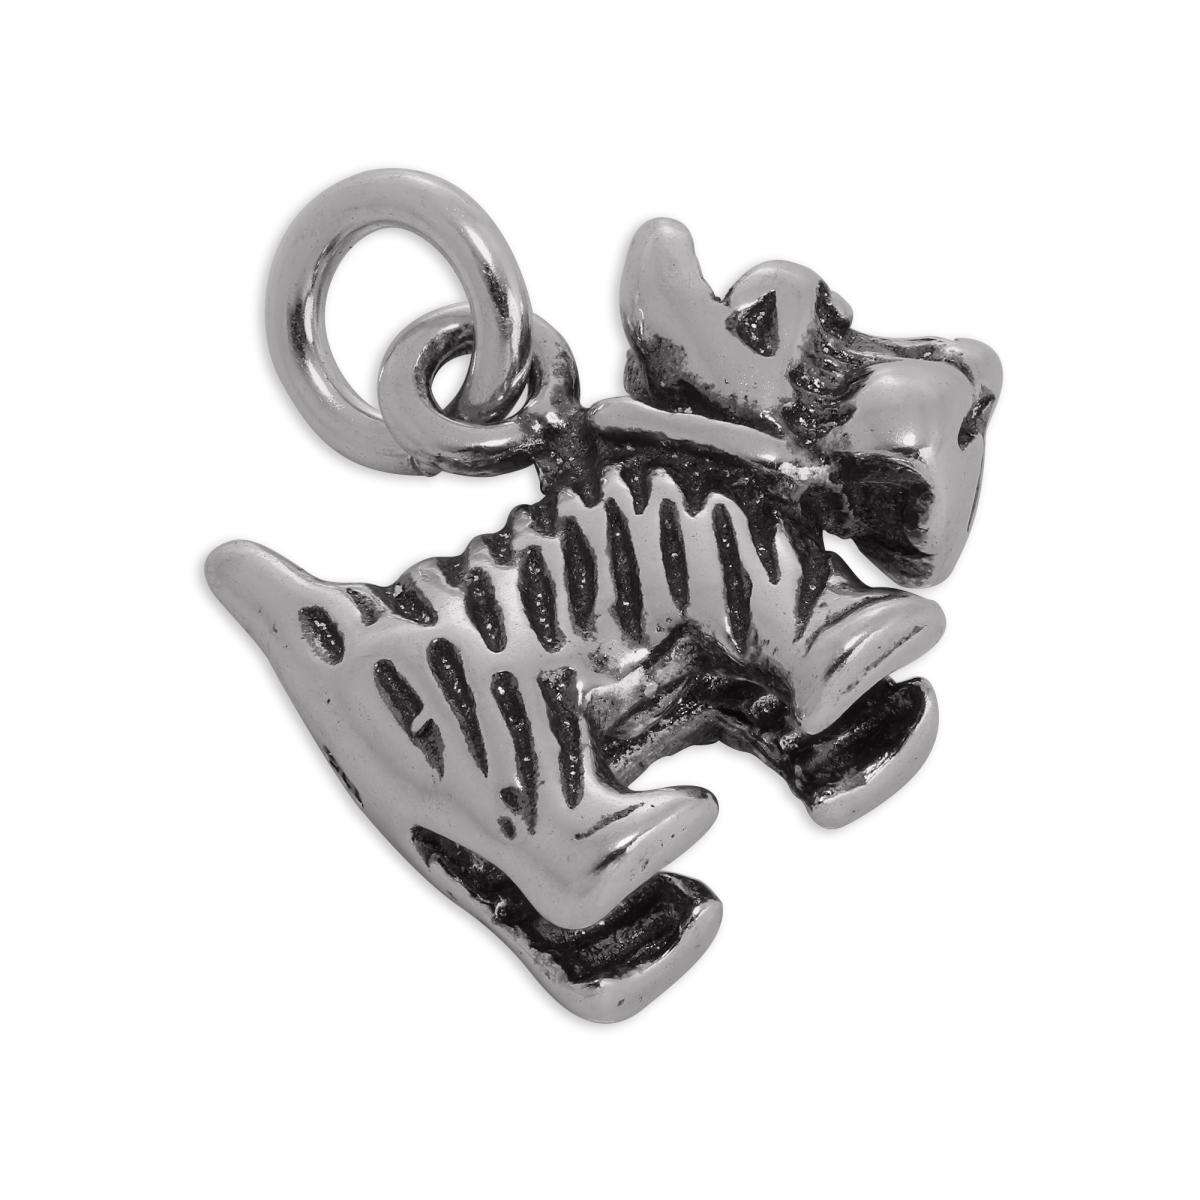 Buy Online 926 Solid Silver Charm Exporter |Huge Collections Scottie Dog Charm|